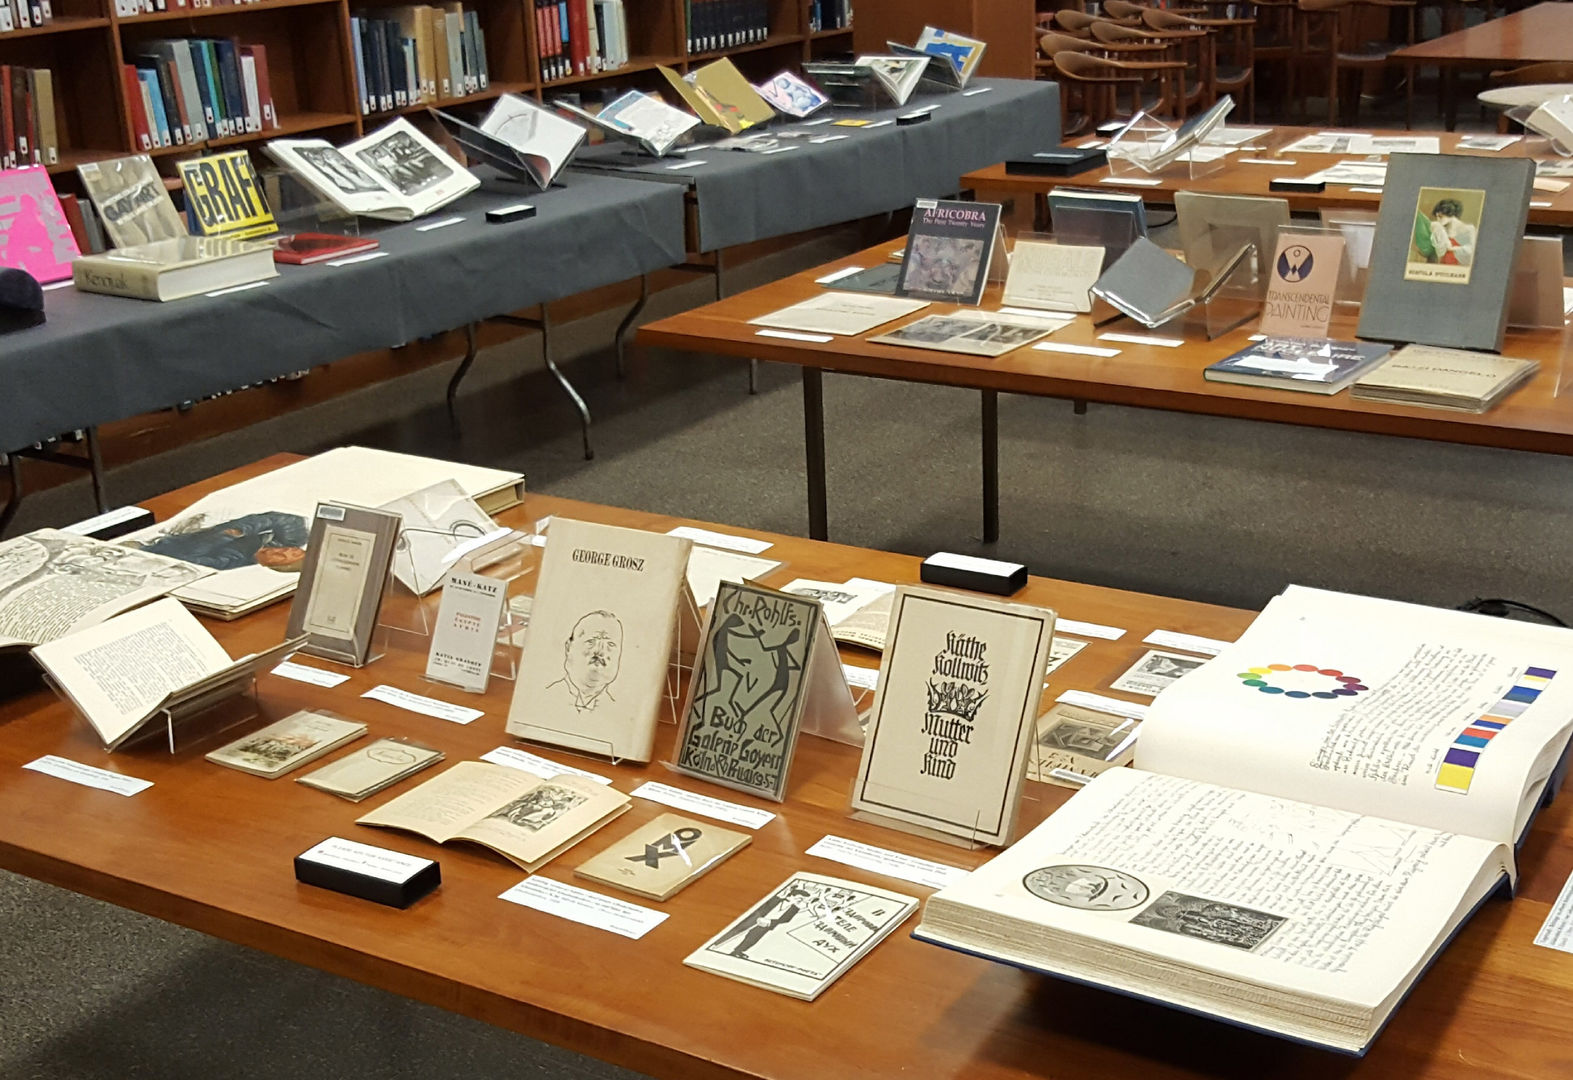 Tables covered with books on display